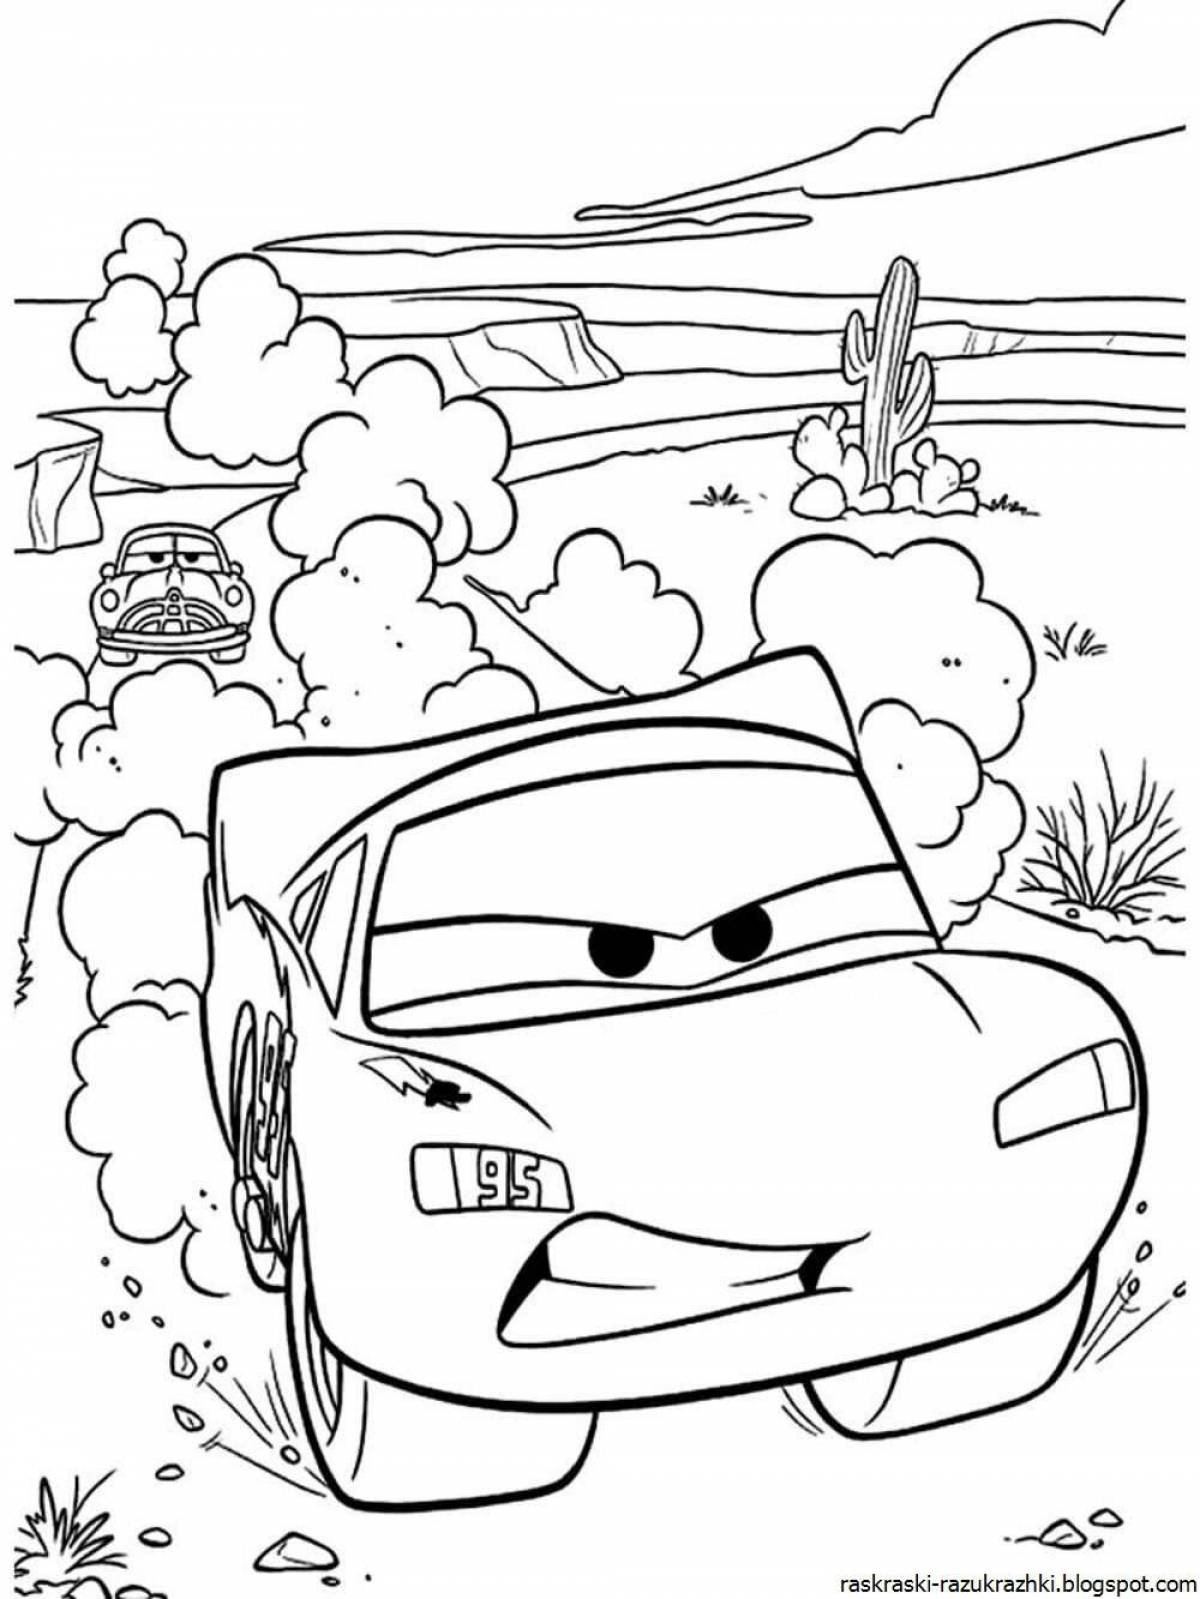 Charming lightning mcqueen coloring book